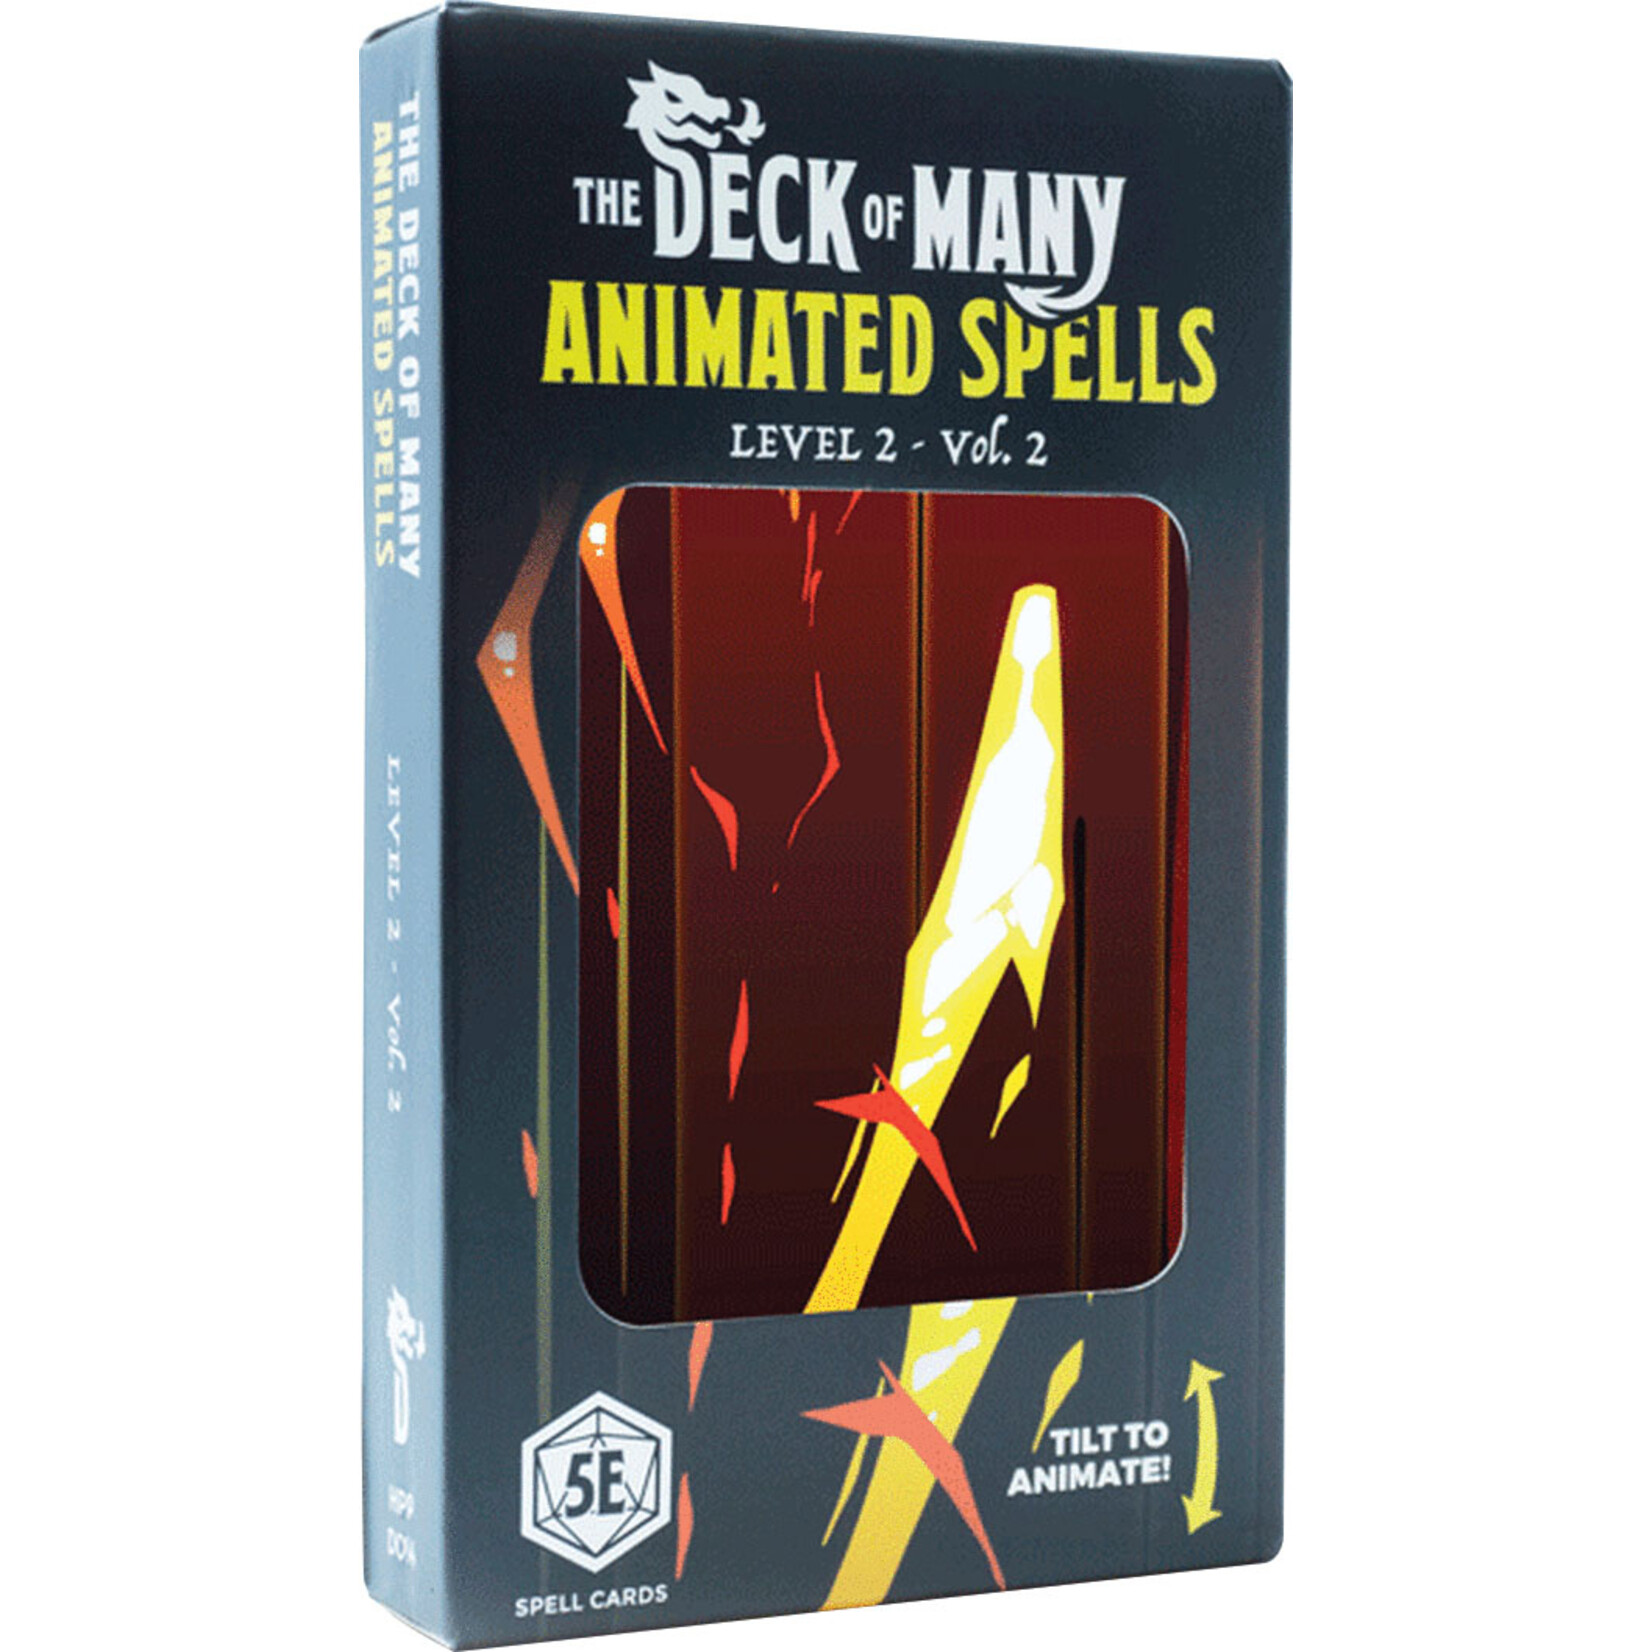 HitPoint Press The Deck of Many Animated Spells: 5E Level 2 Volume 2